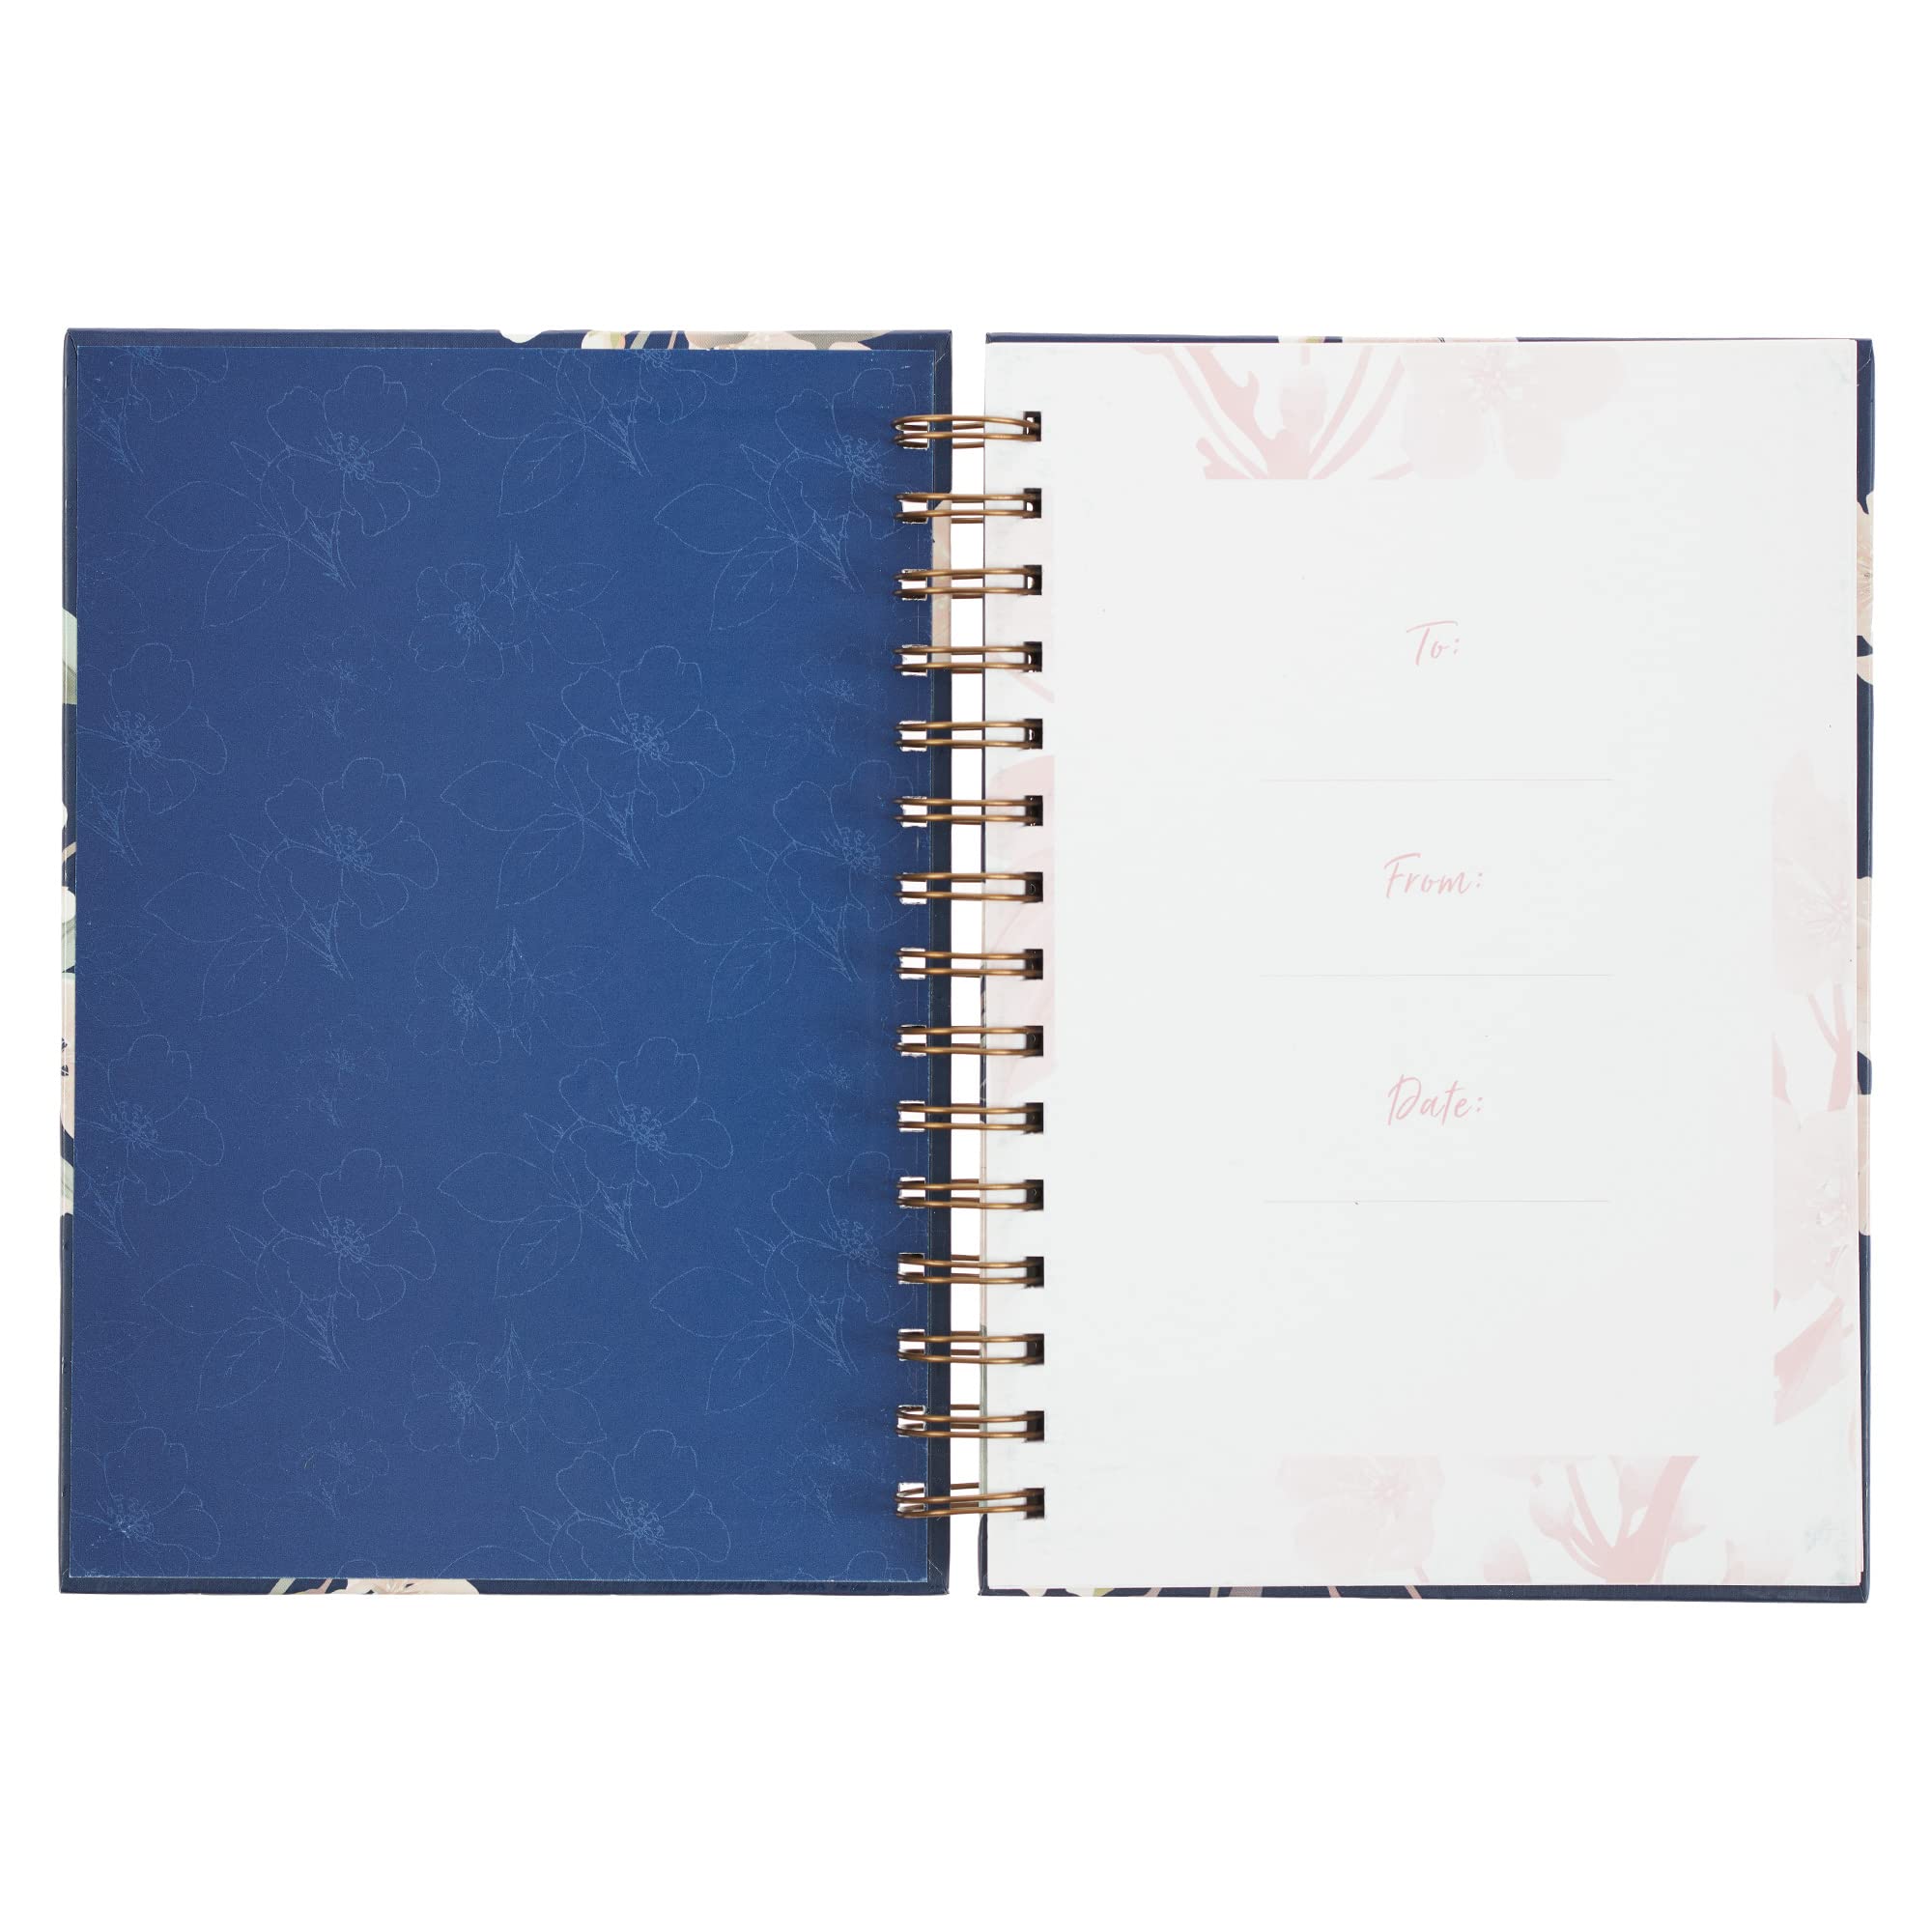 Inspirational Spiral Journal Notebook for Women It is Well Navy Blue Floral Wire Bound w/192 Ruled Pages, Large Hardcover, With Love